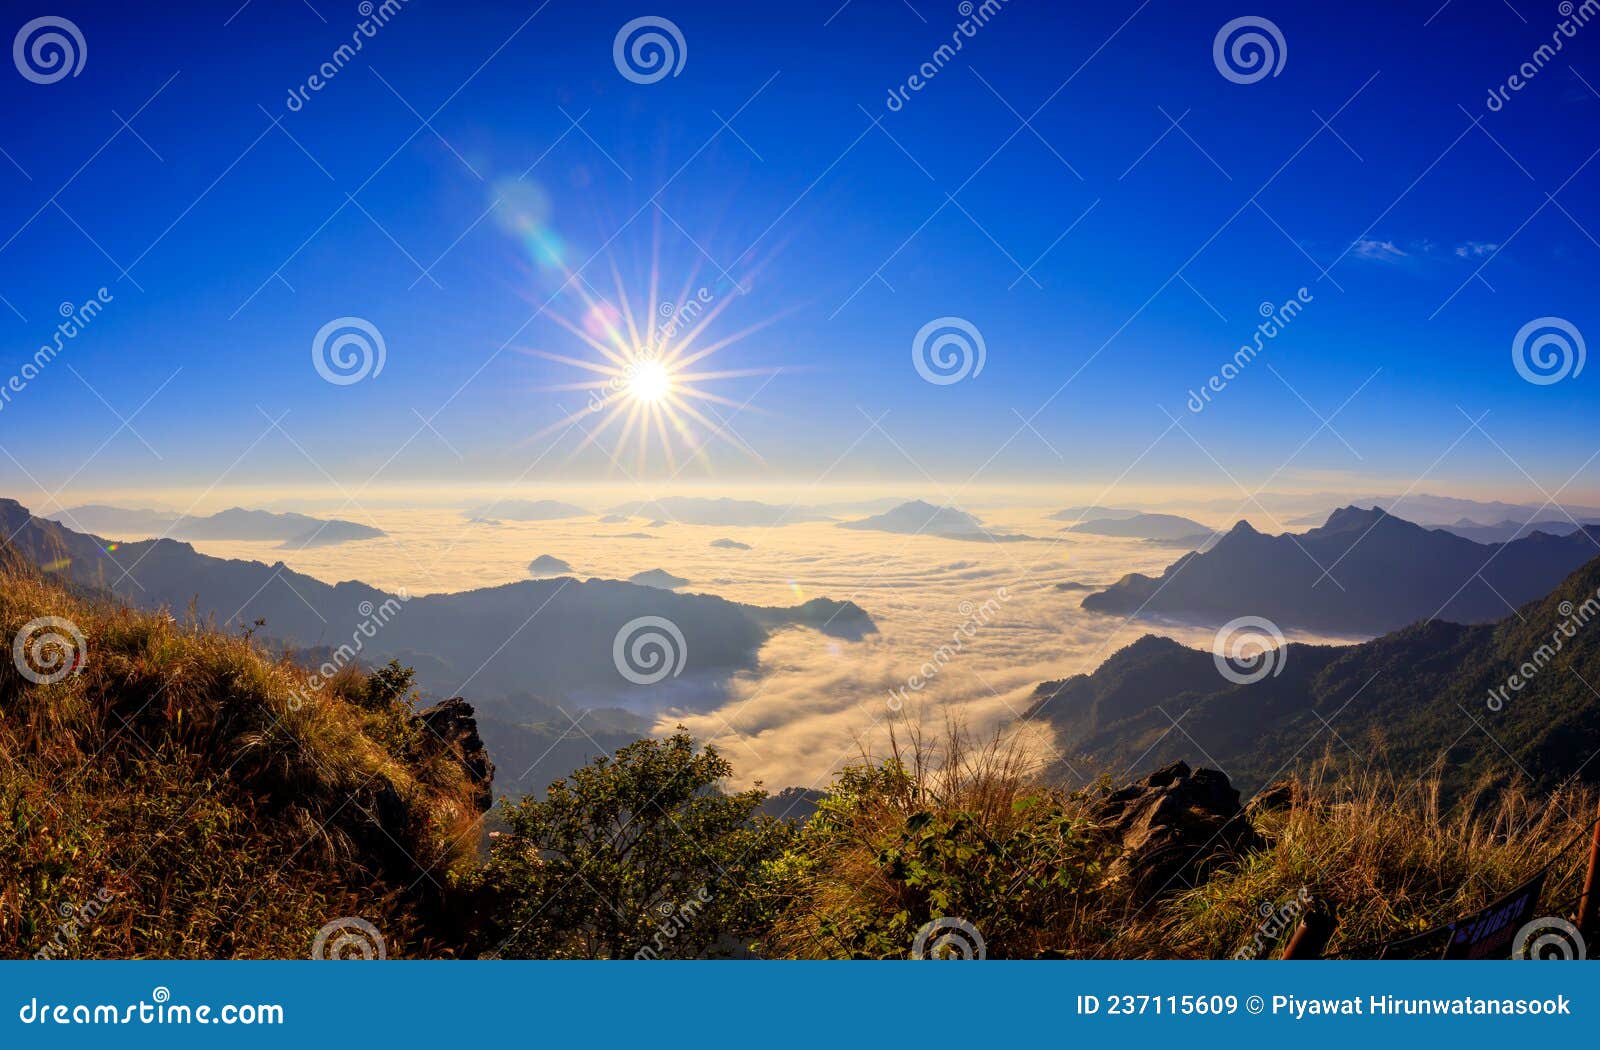 starlight sunrise scene with the peak of mountain called phu chifa with fog over the city below